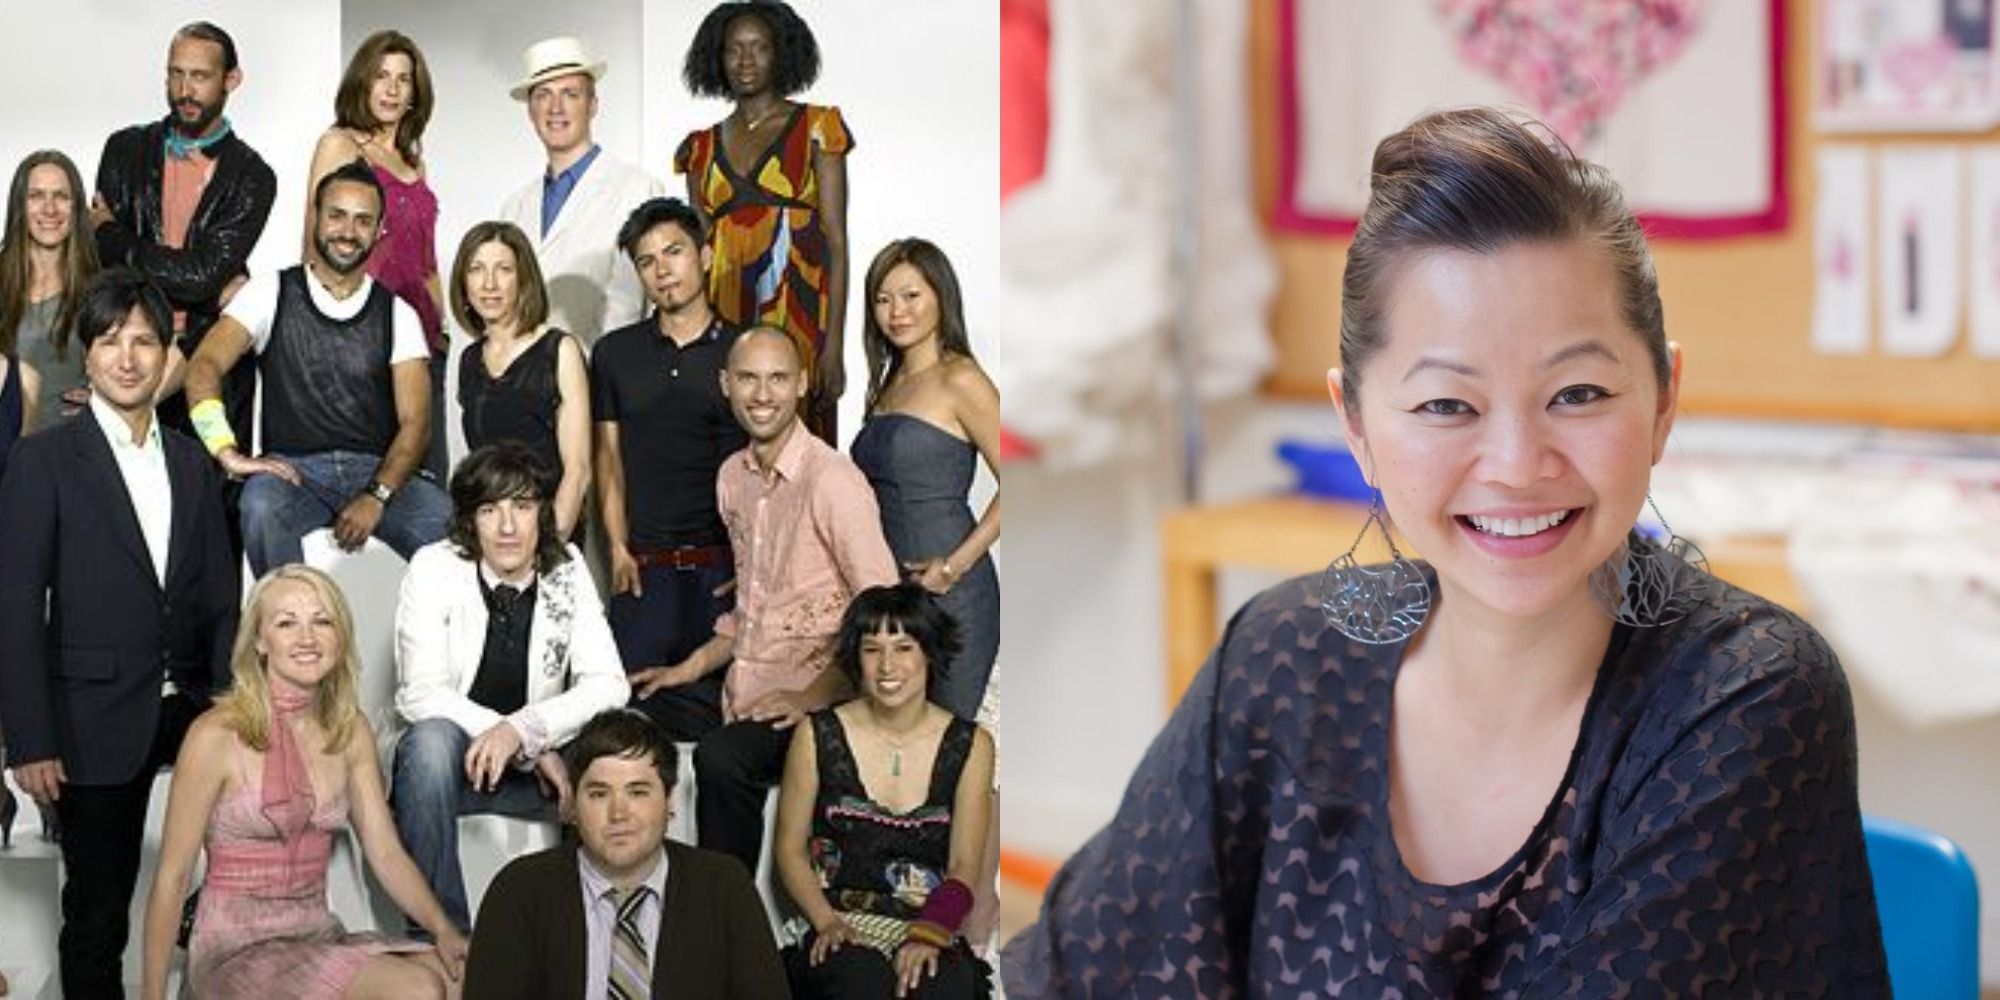 SPlit image showing the cast of Project Runway Season 2, and the winner, Chloe Dao